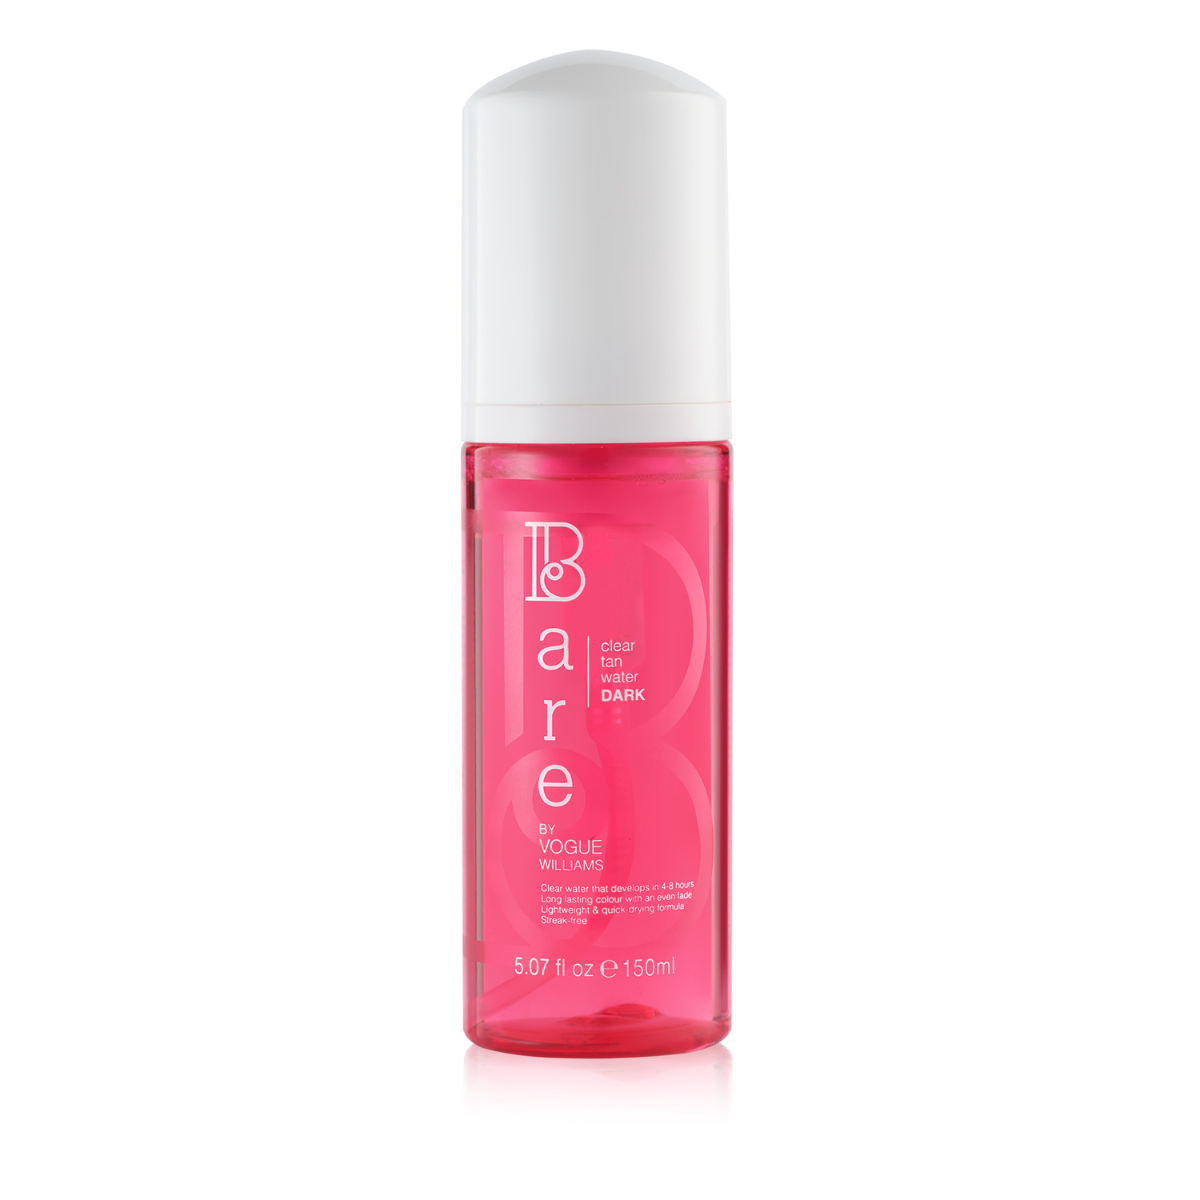 Bare by Vogue Clear Tan Water Dark